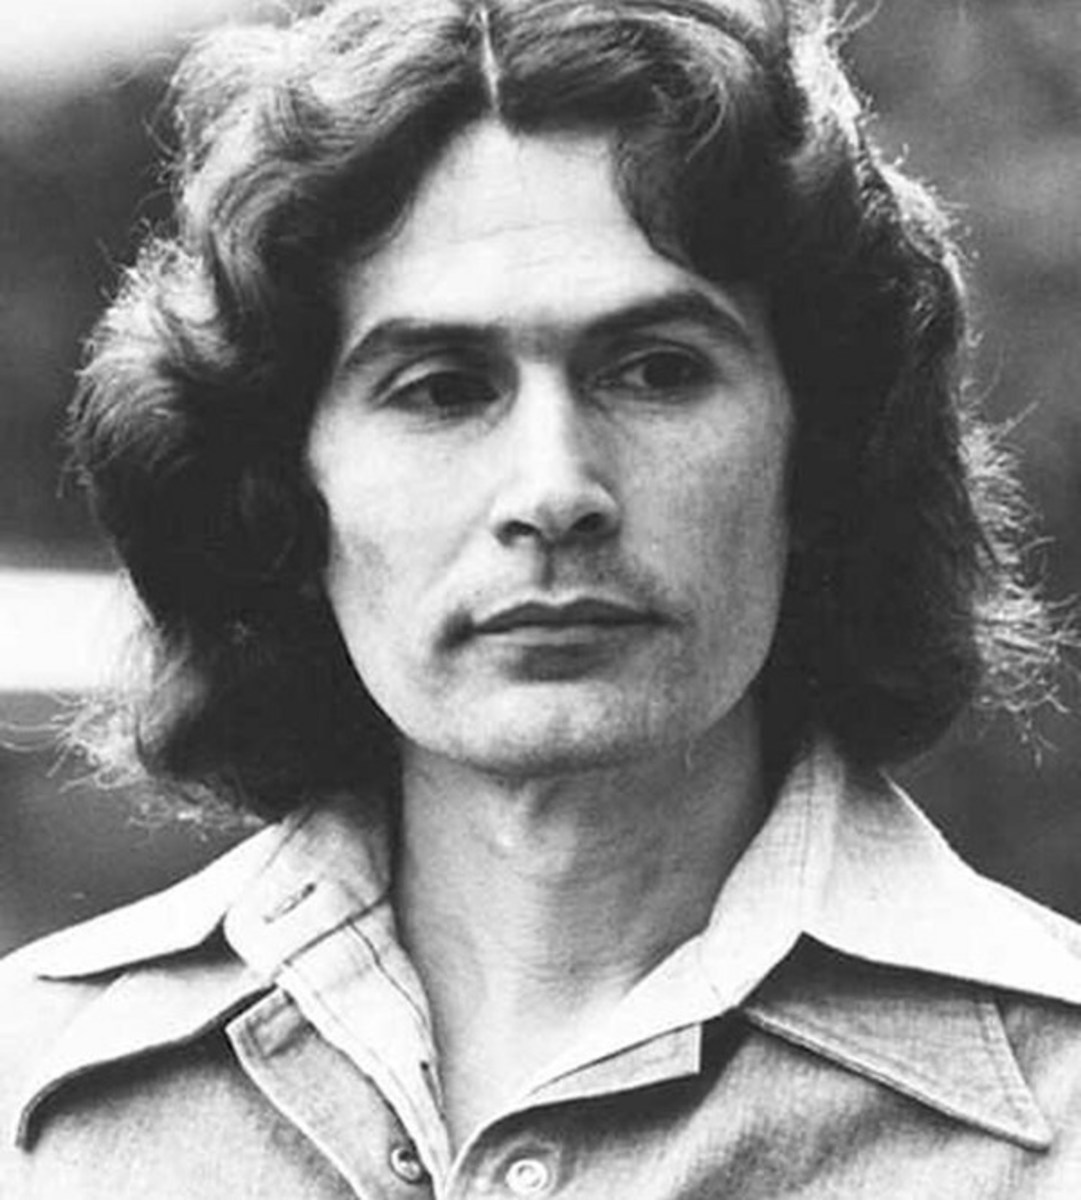 Serial killer Rodney Alcala was diagnosed with severe mental disorders.